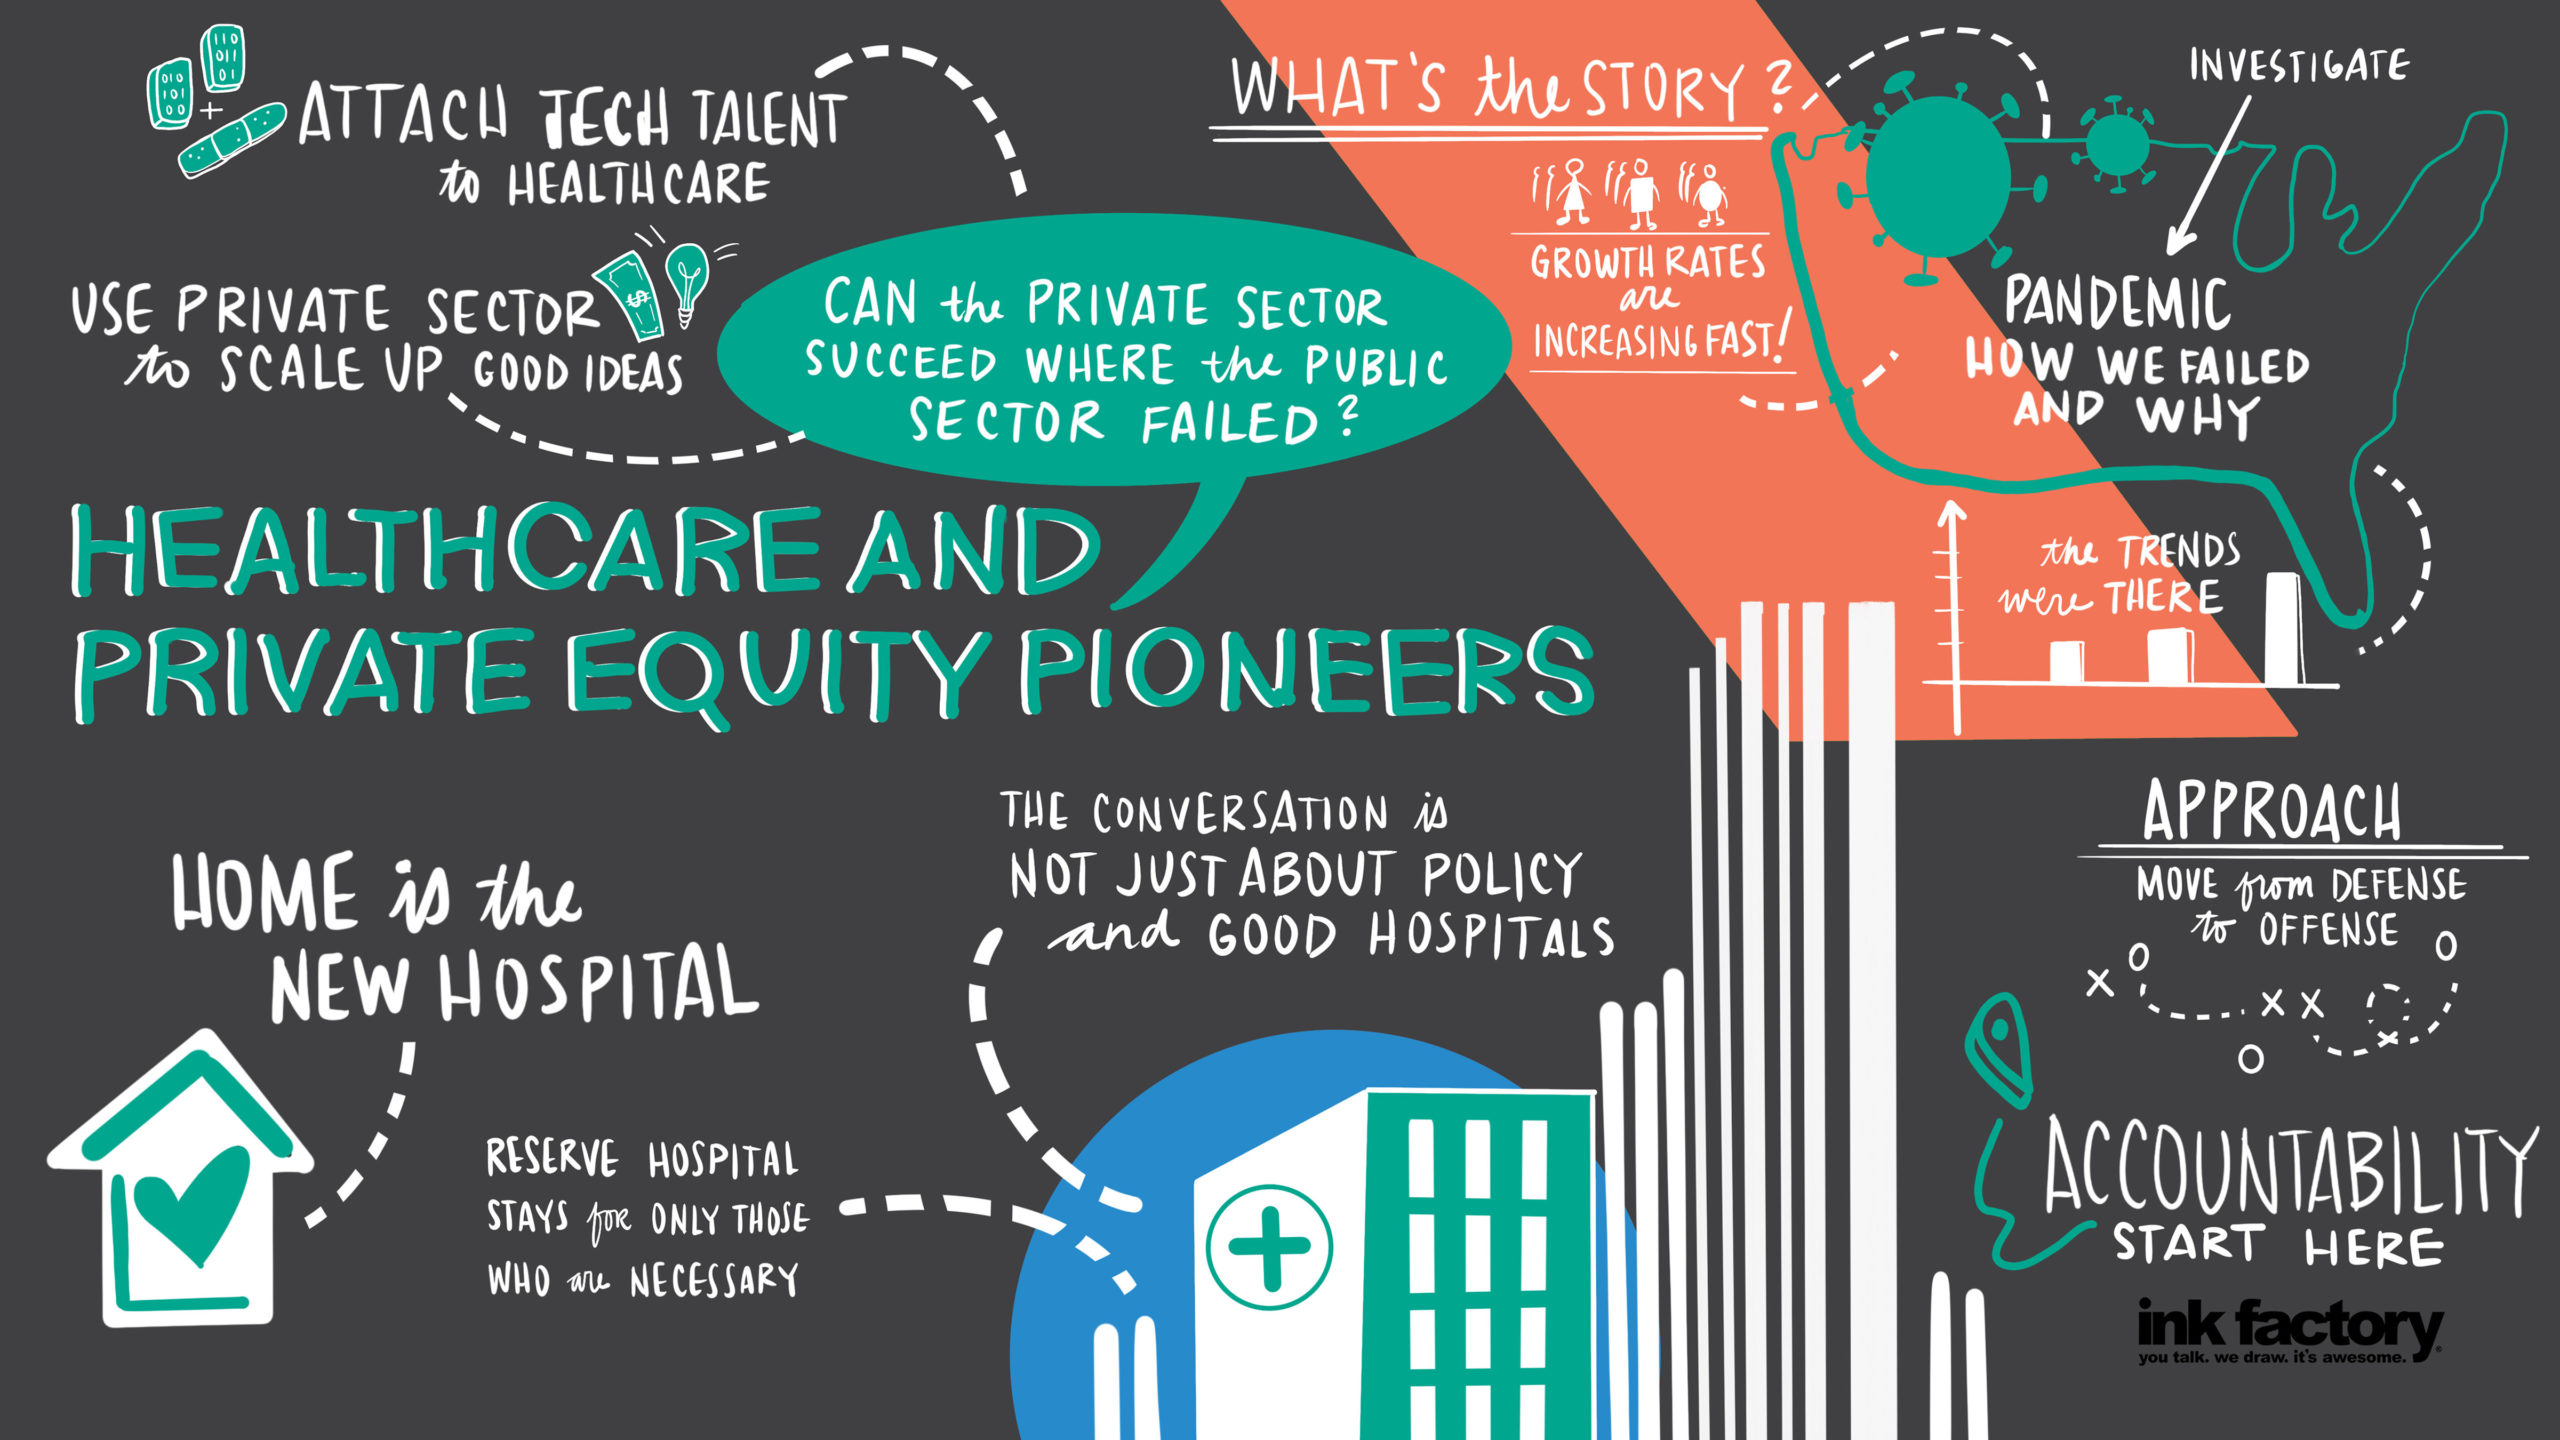 HPE New York 2020 Healthcare Private Equity Pioneers HEALTH & LIFE